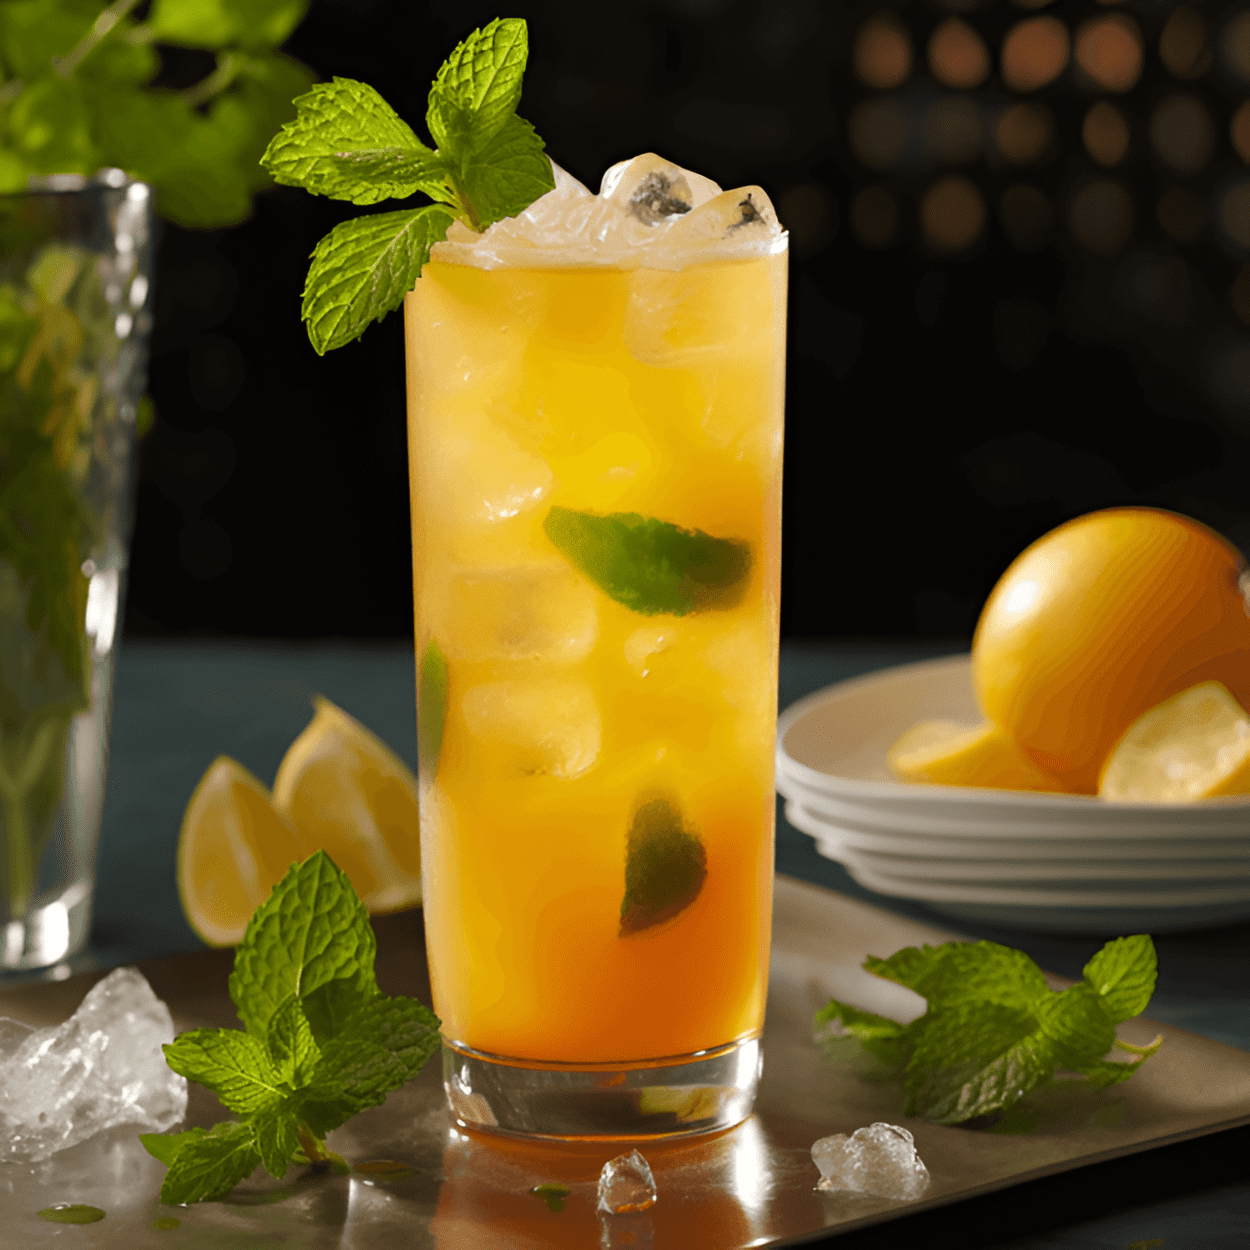 Papaya Passion Cocktail Recipe - The Papaya Passion is a sweet and slightly tangy cocktail with a strong fruity flavor. The sweetness of the papaya is balanced by the tartness of the lime, while the rum adds a warm, smooth finish.